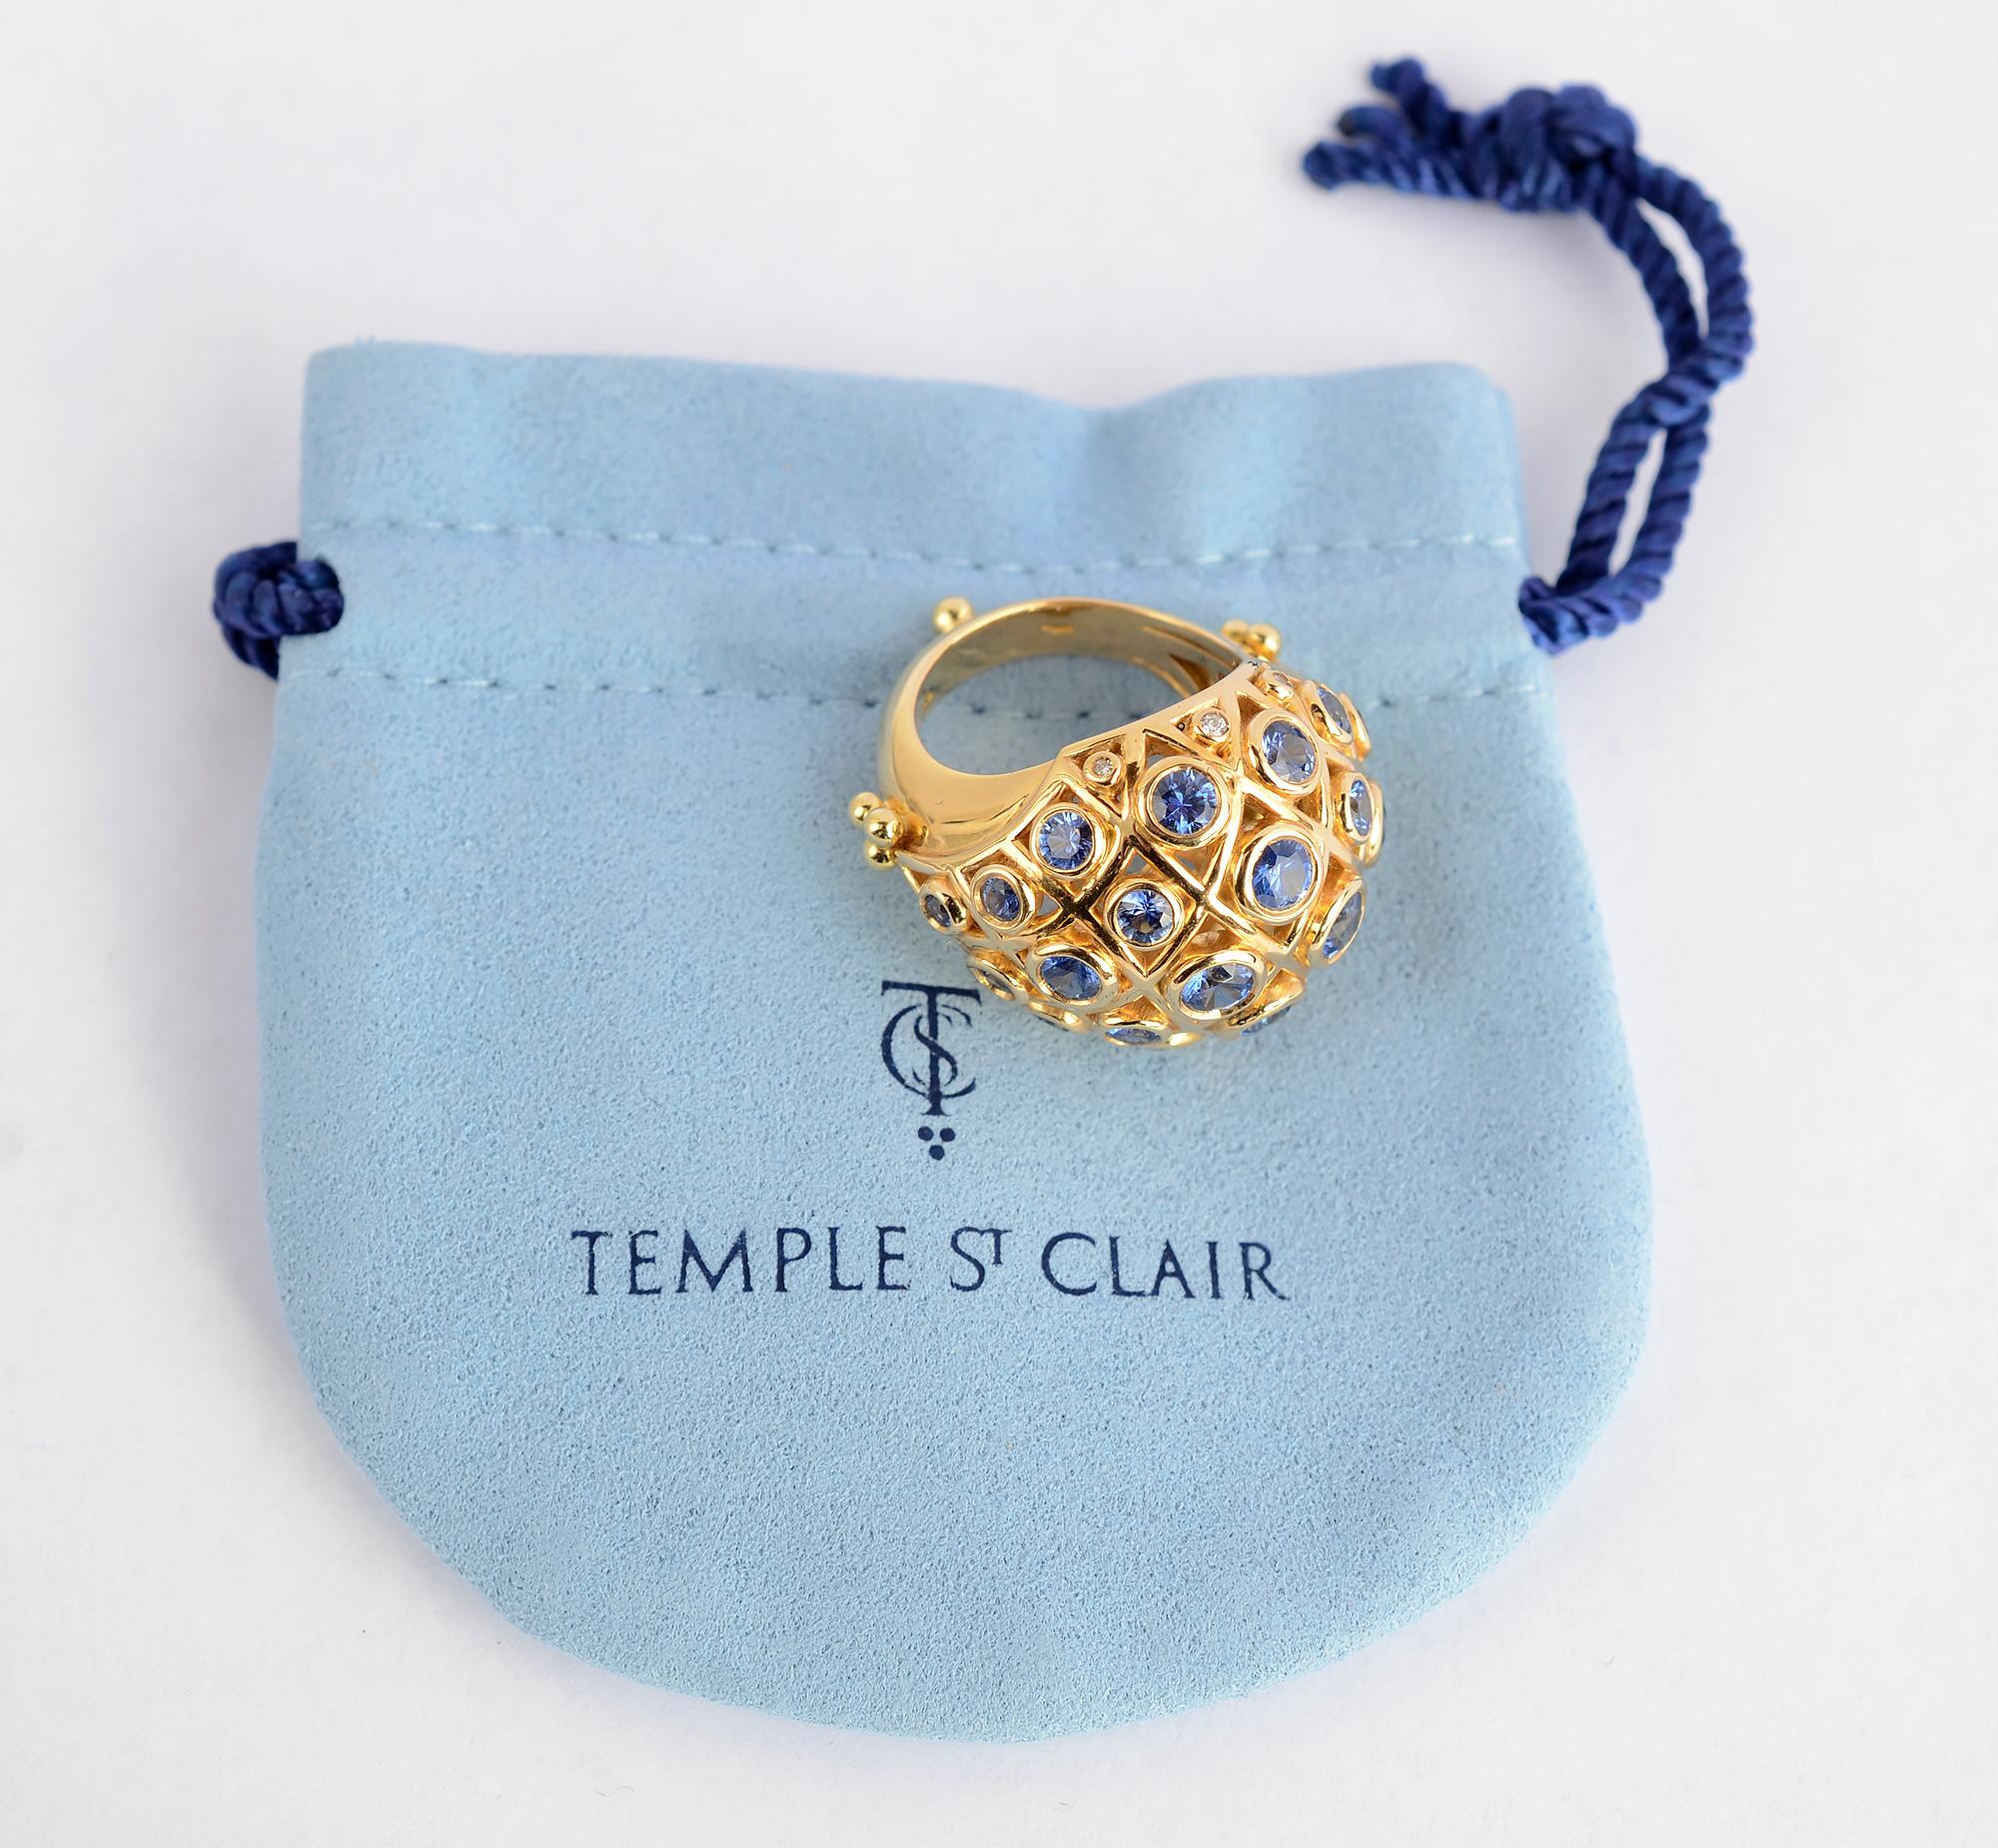 Exquisite domed ring with round sapphires and diamonds by Temple St. Clair. 
The ring has 23 sapphires that are graduated in size. There are 6 diamonds on the bottom row. The ring has St. Clair's signature gold ball on the back of the shank as well